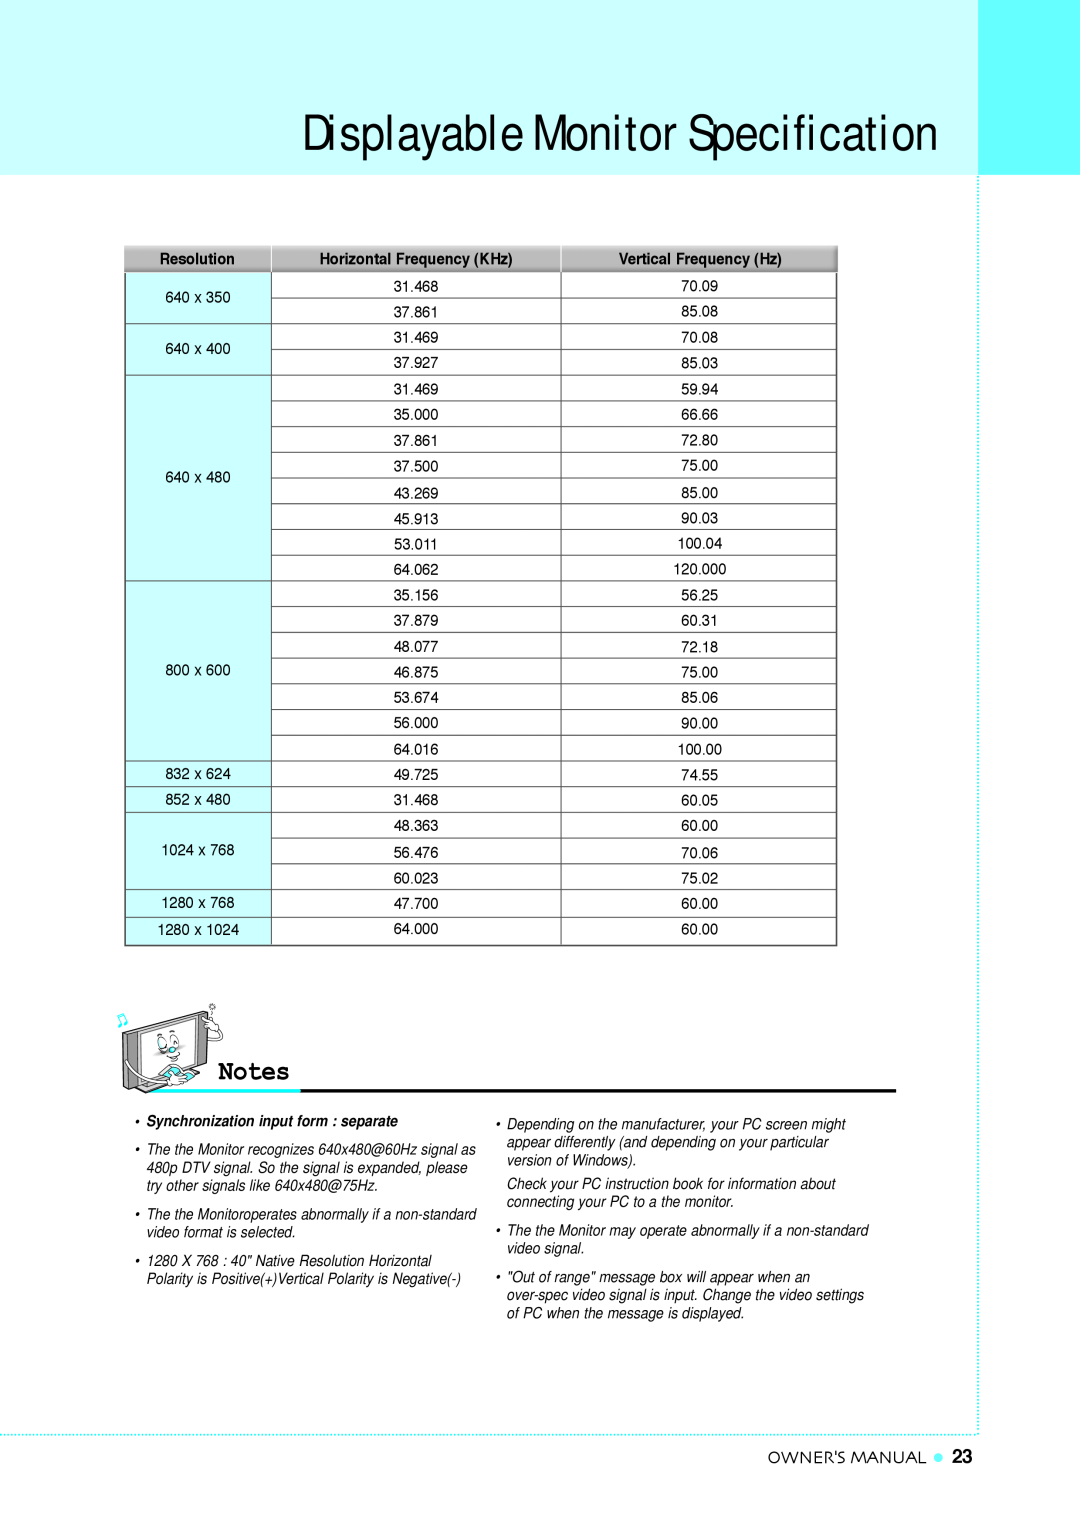 InFocus TD40 PAL manual Displayable Monitor Specification, Owners Manual, Vertical Frequency Hz 